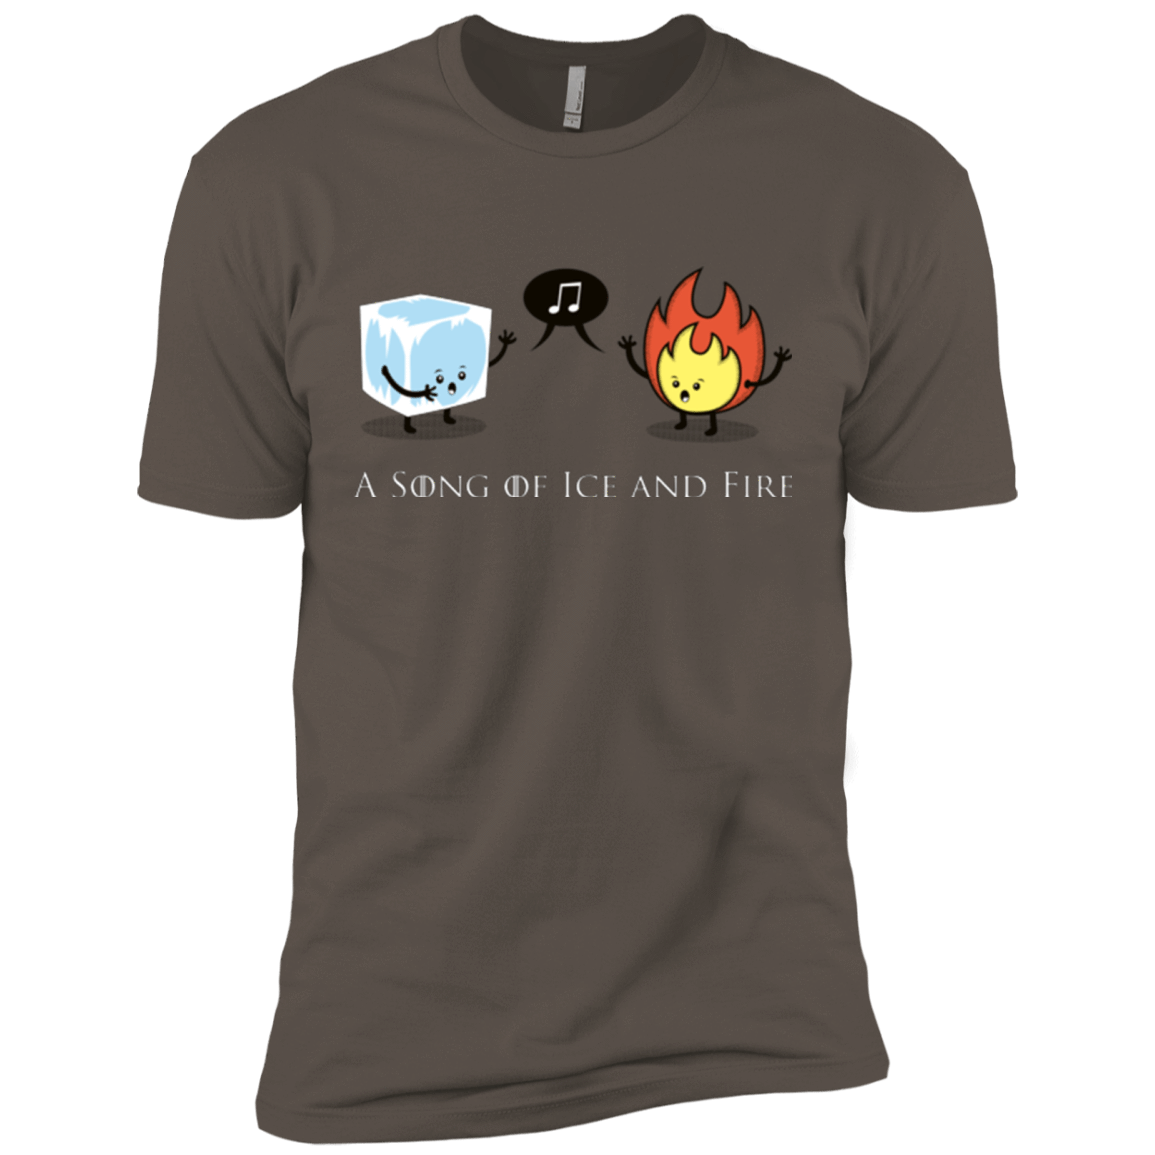 T-Shirts Warm Grey / X-Small A Song of Ice and Fire Men's Premium T-Shirt